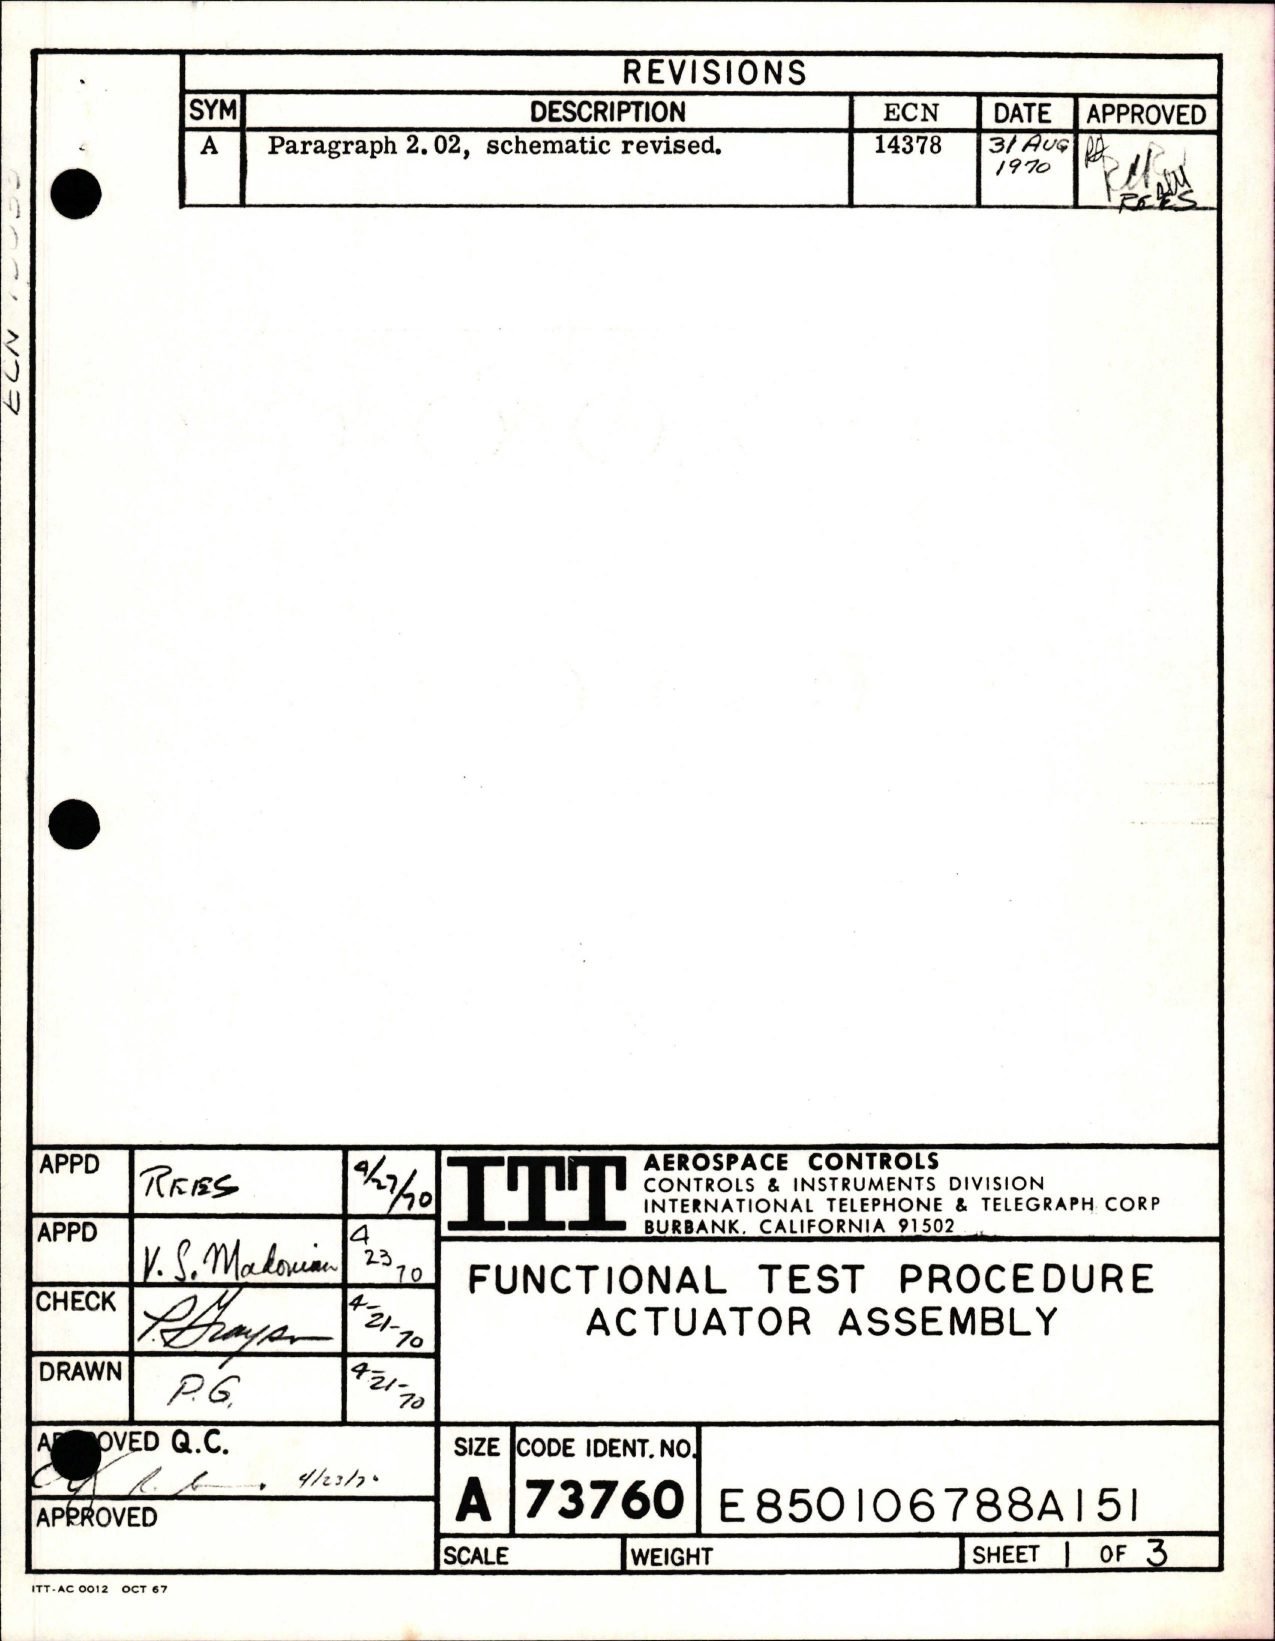 Sample page 1 from AirCorps Library document: Functional Test Procedure for Actuator Assembly